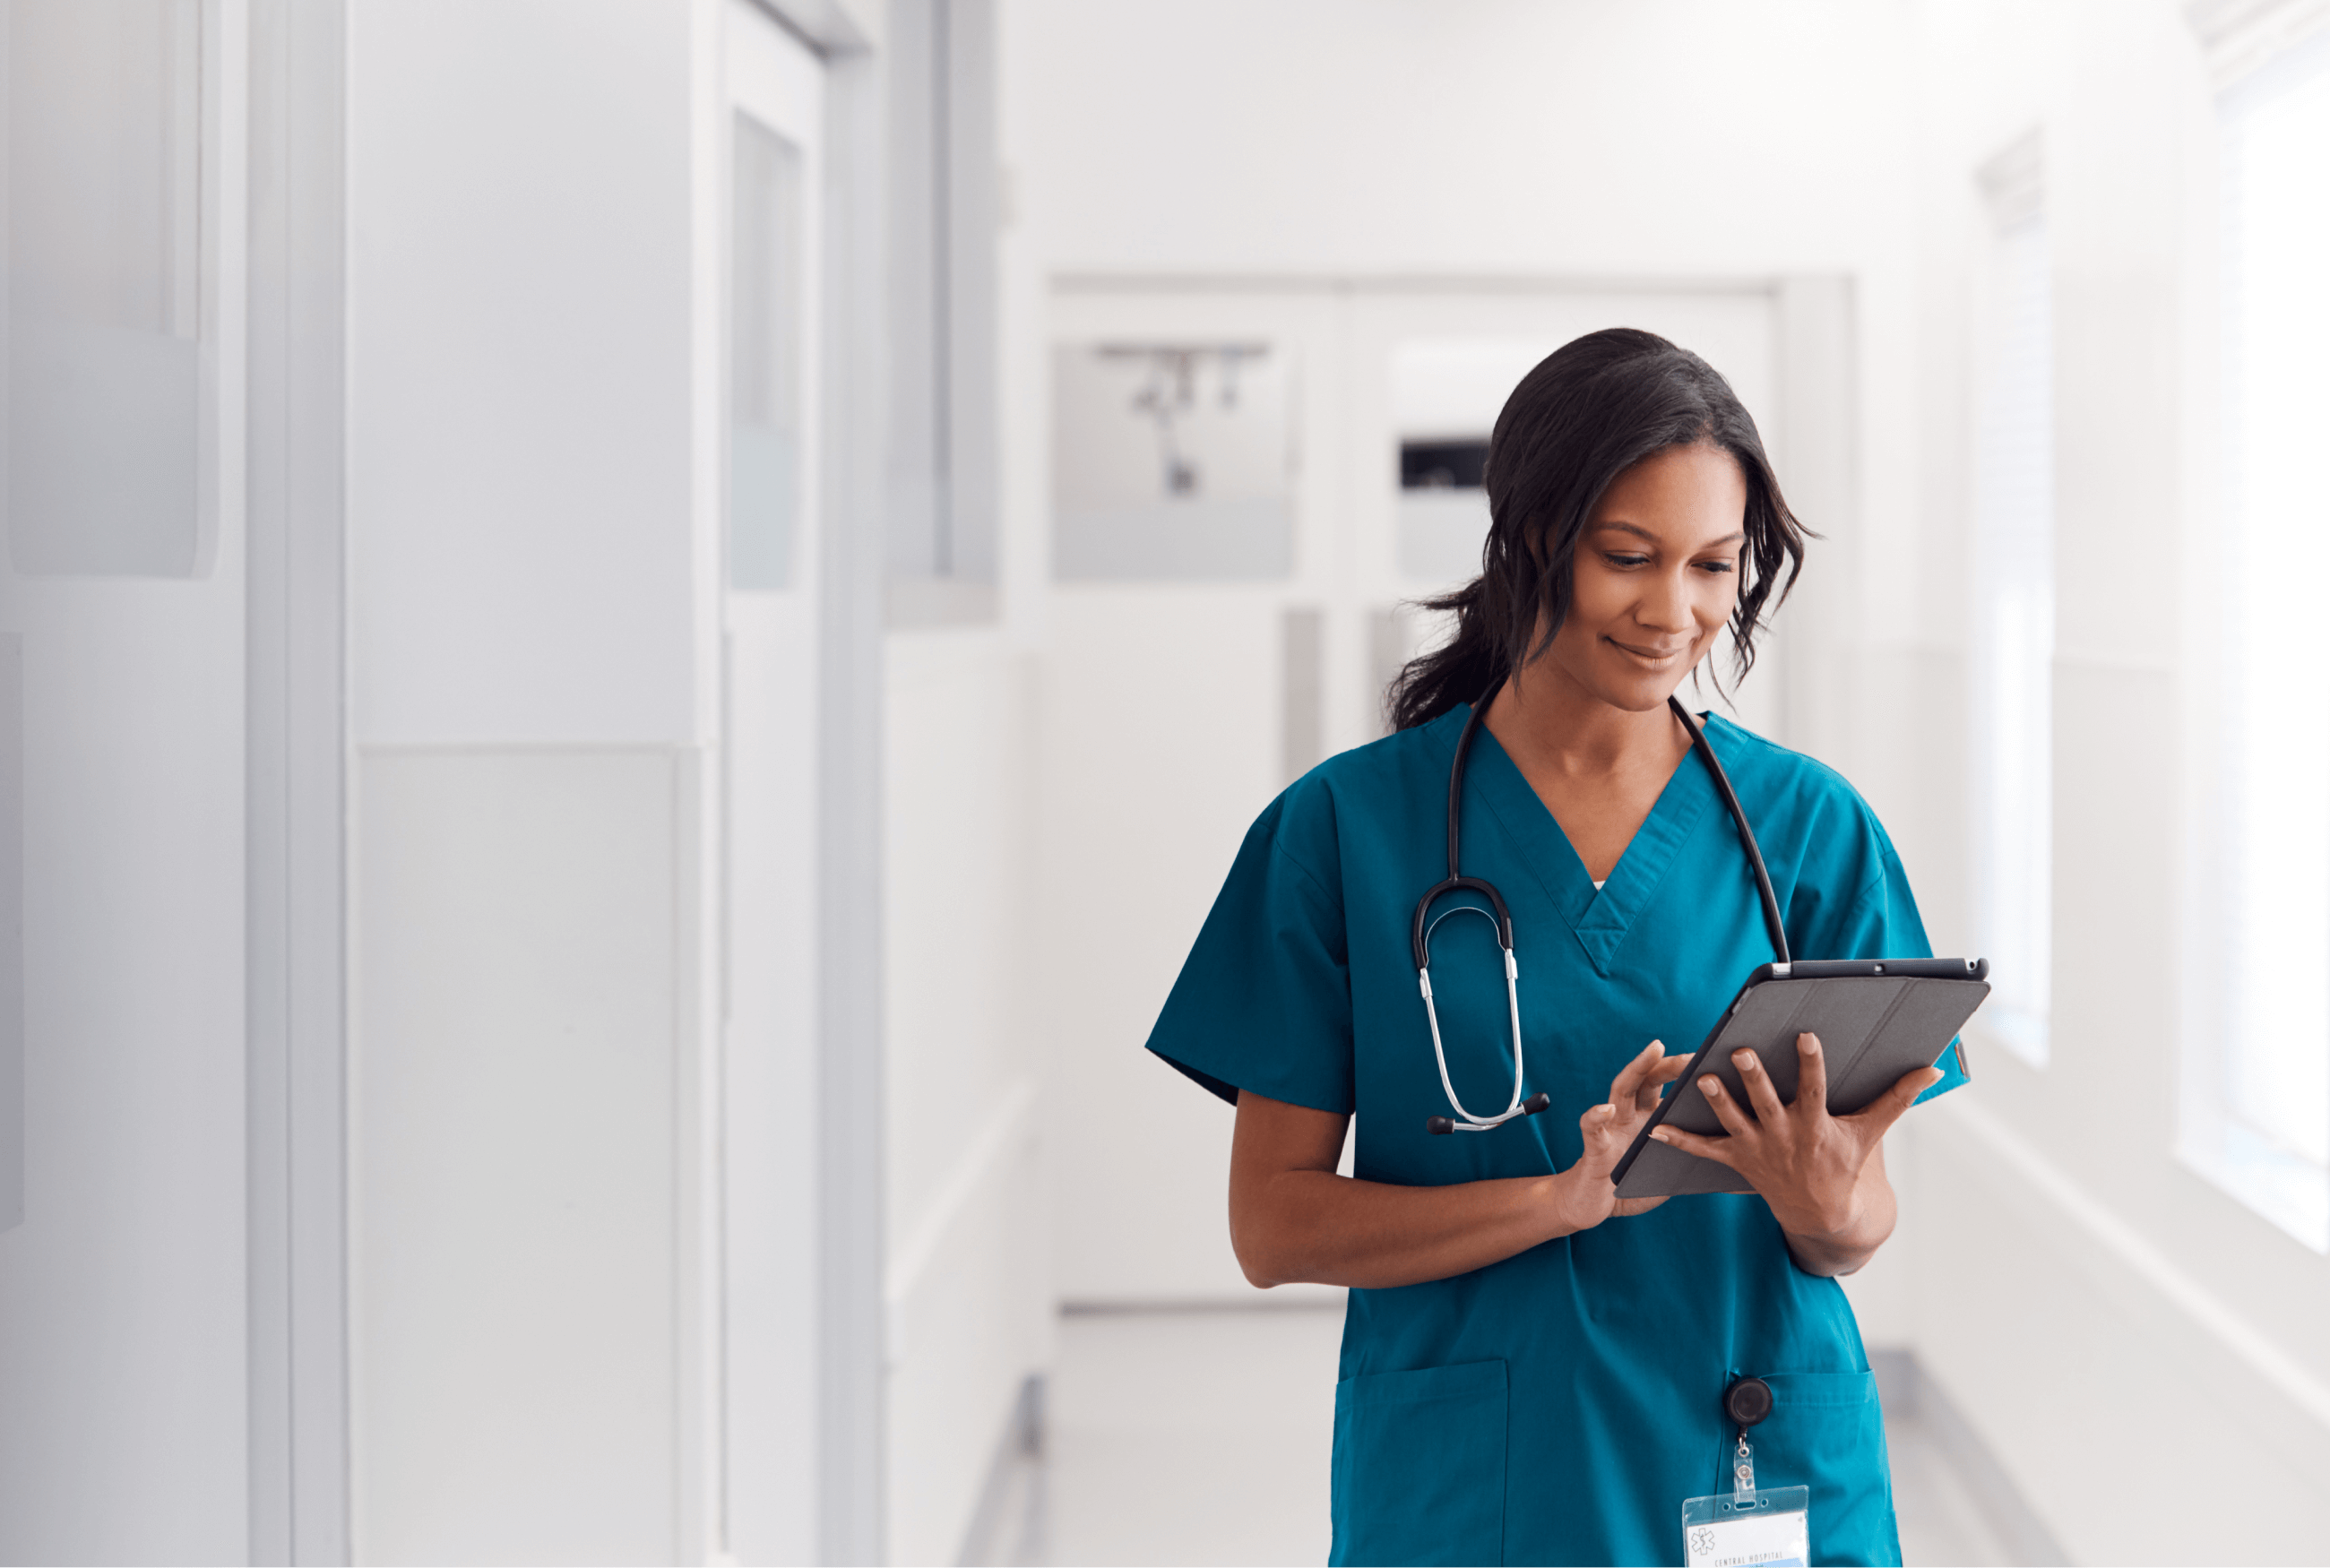 A female clinician uses a tablet in a white hospital corridor